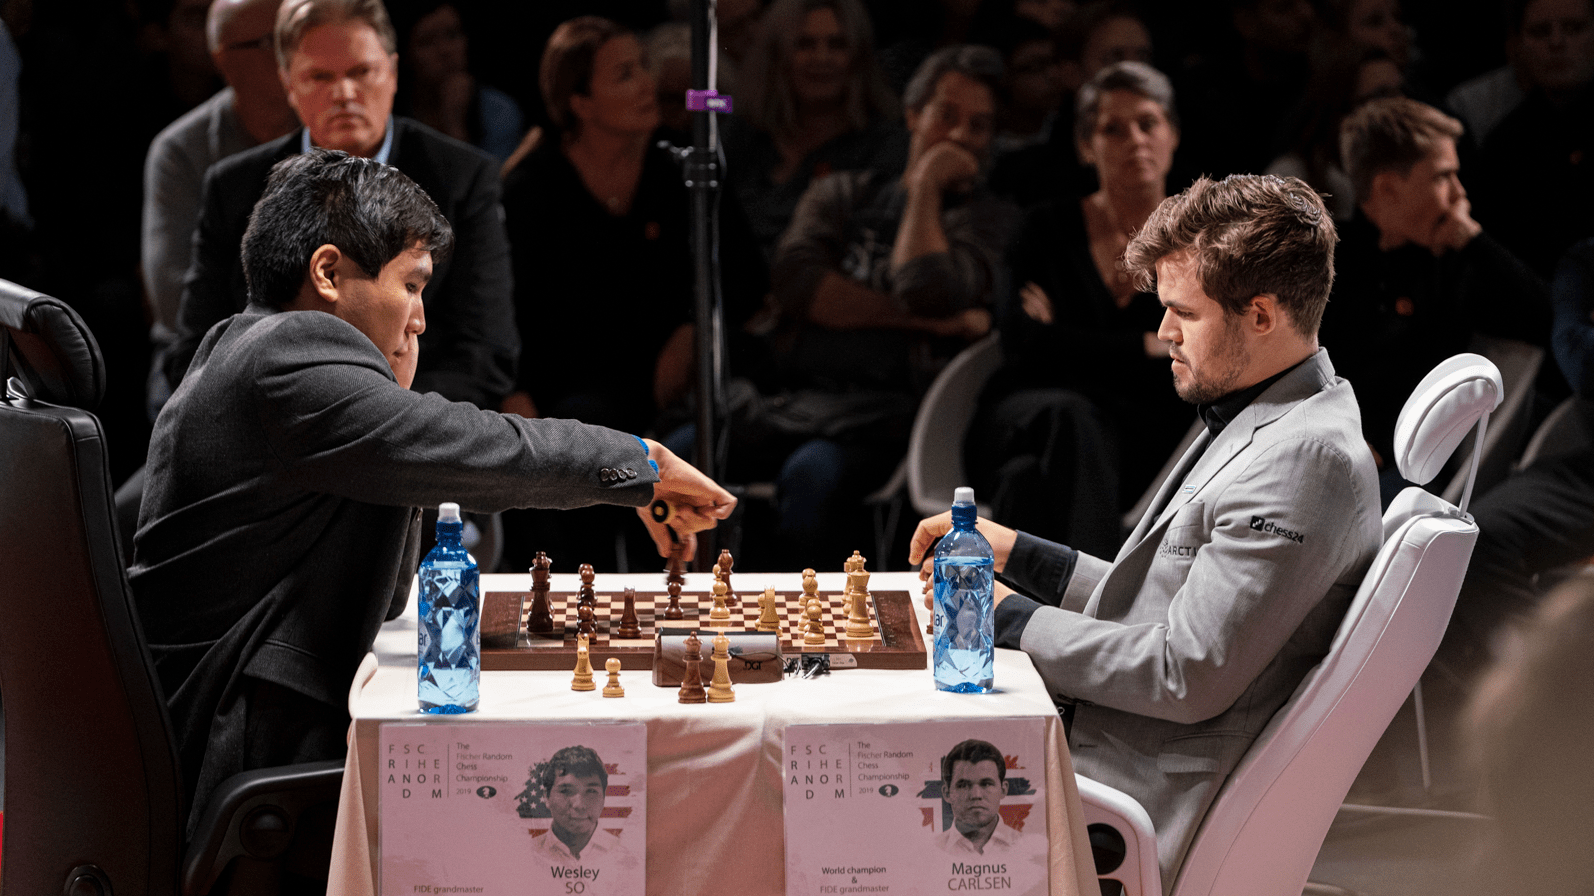 Some Red Hot playing simultaneous chess games with SGM Magnus Carlsen,  2011.